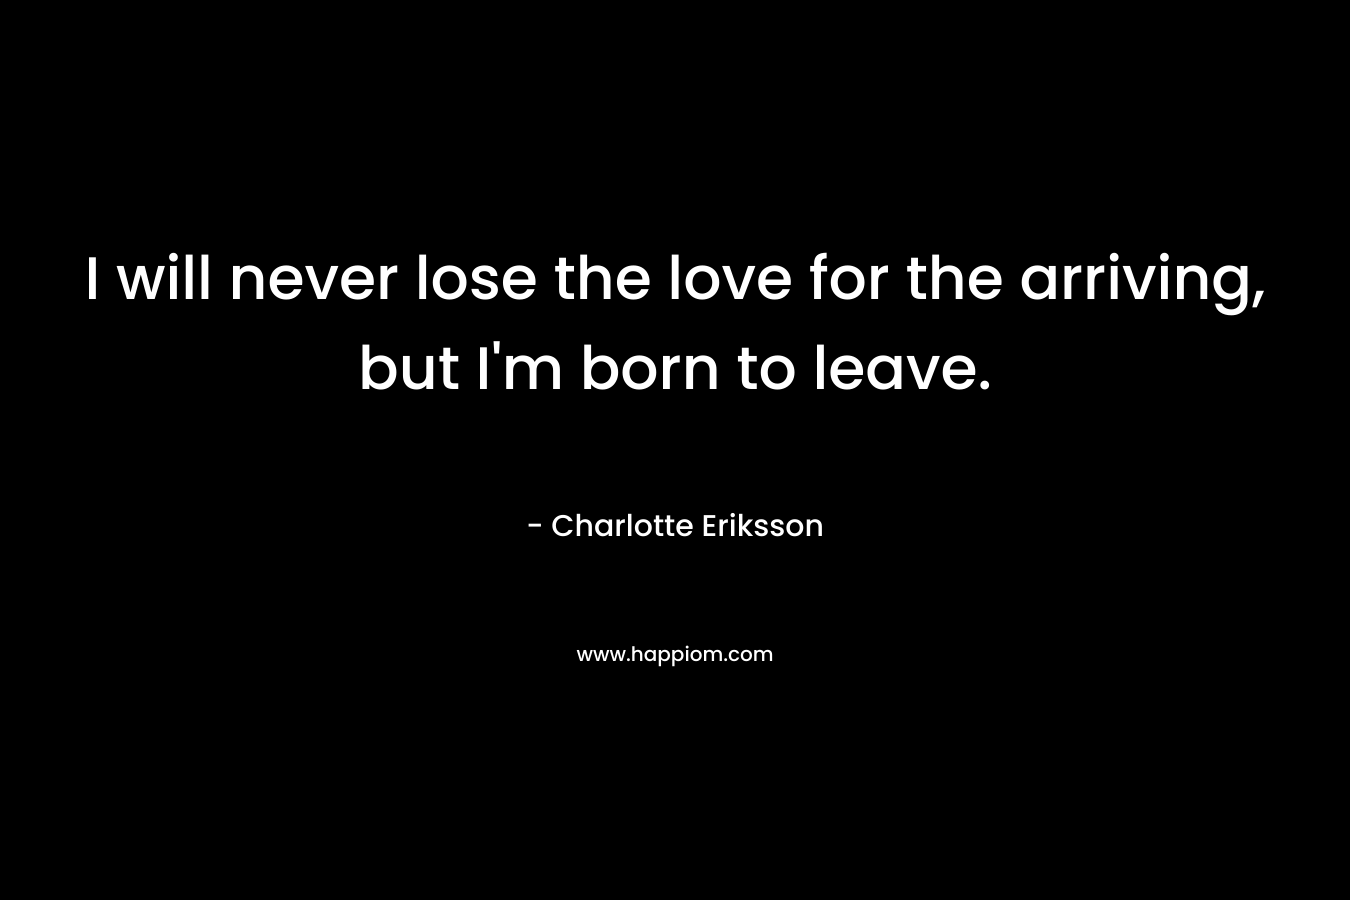 I will never lose the love for the arriving, but I’m born to leave. – Charlotte Eriksson